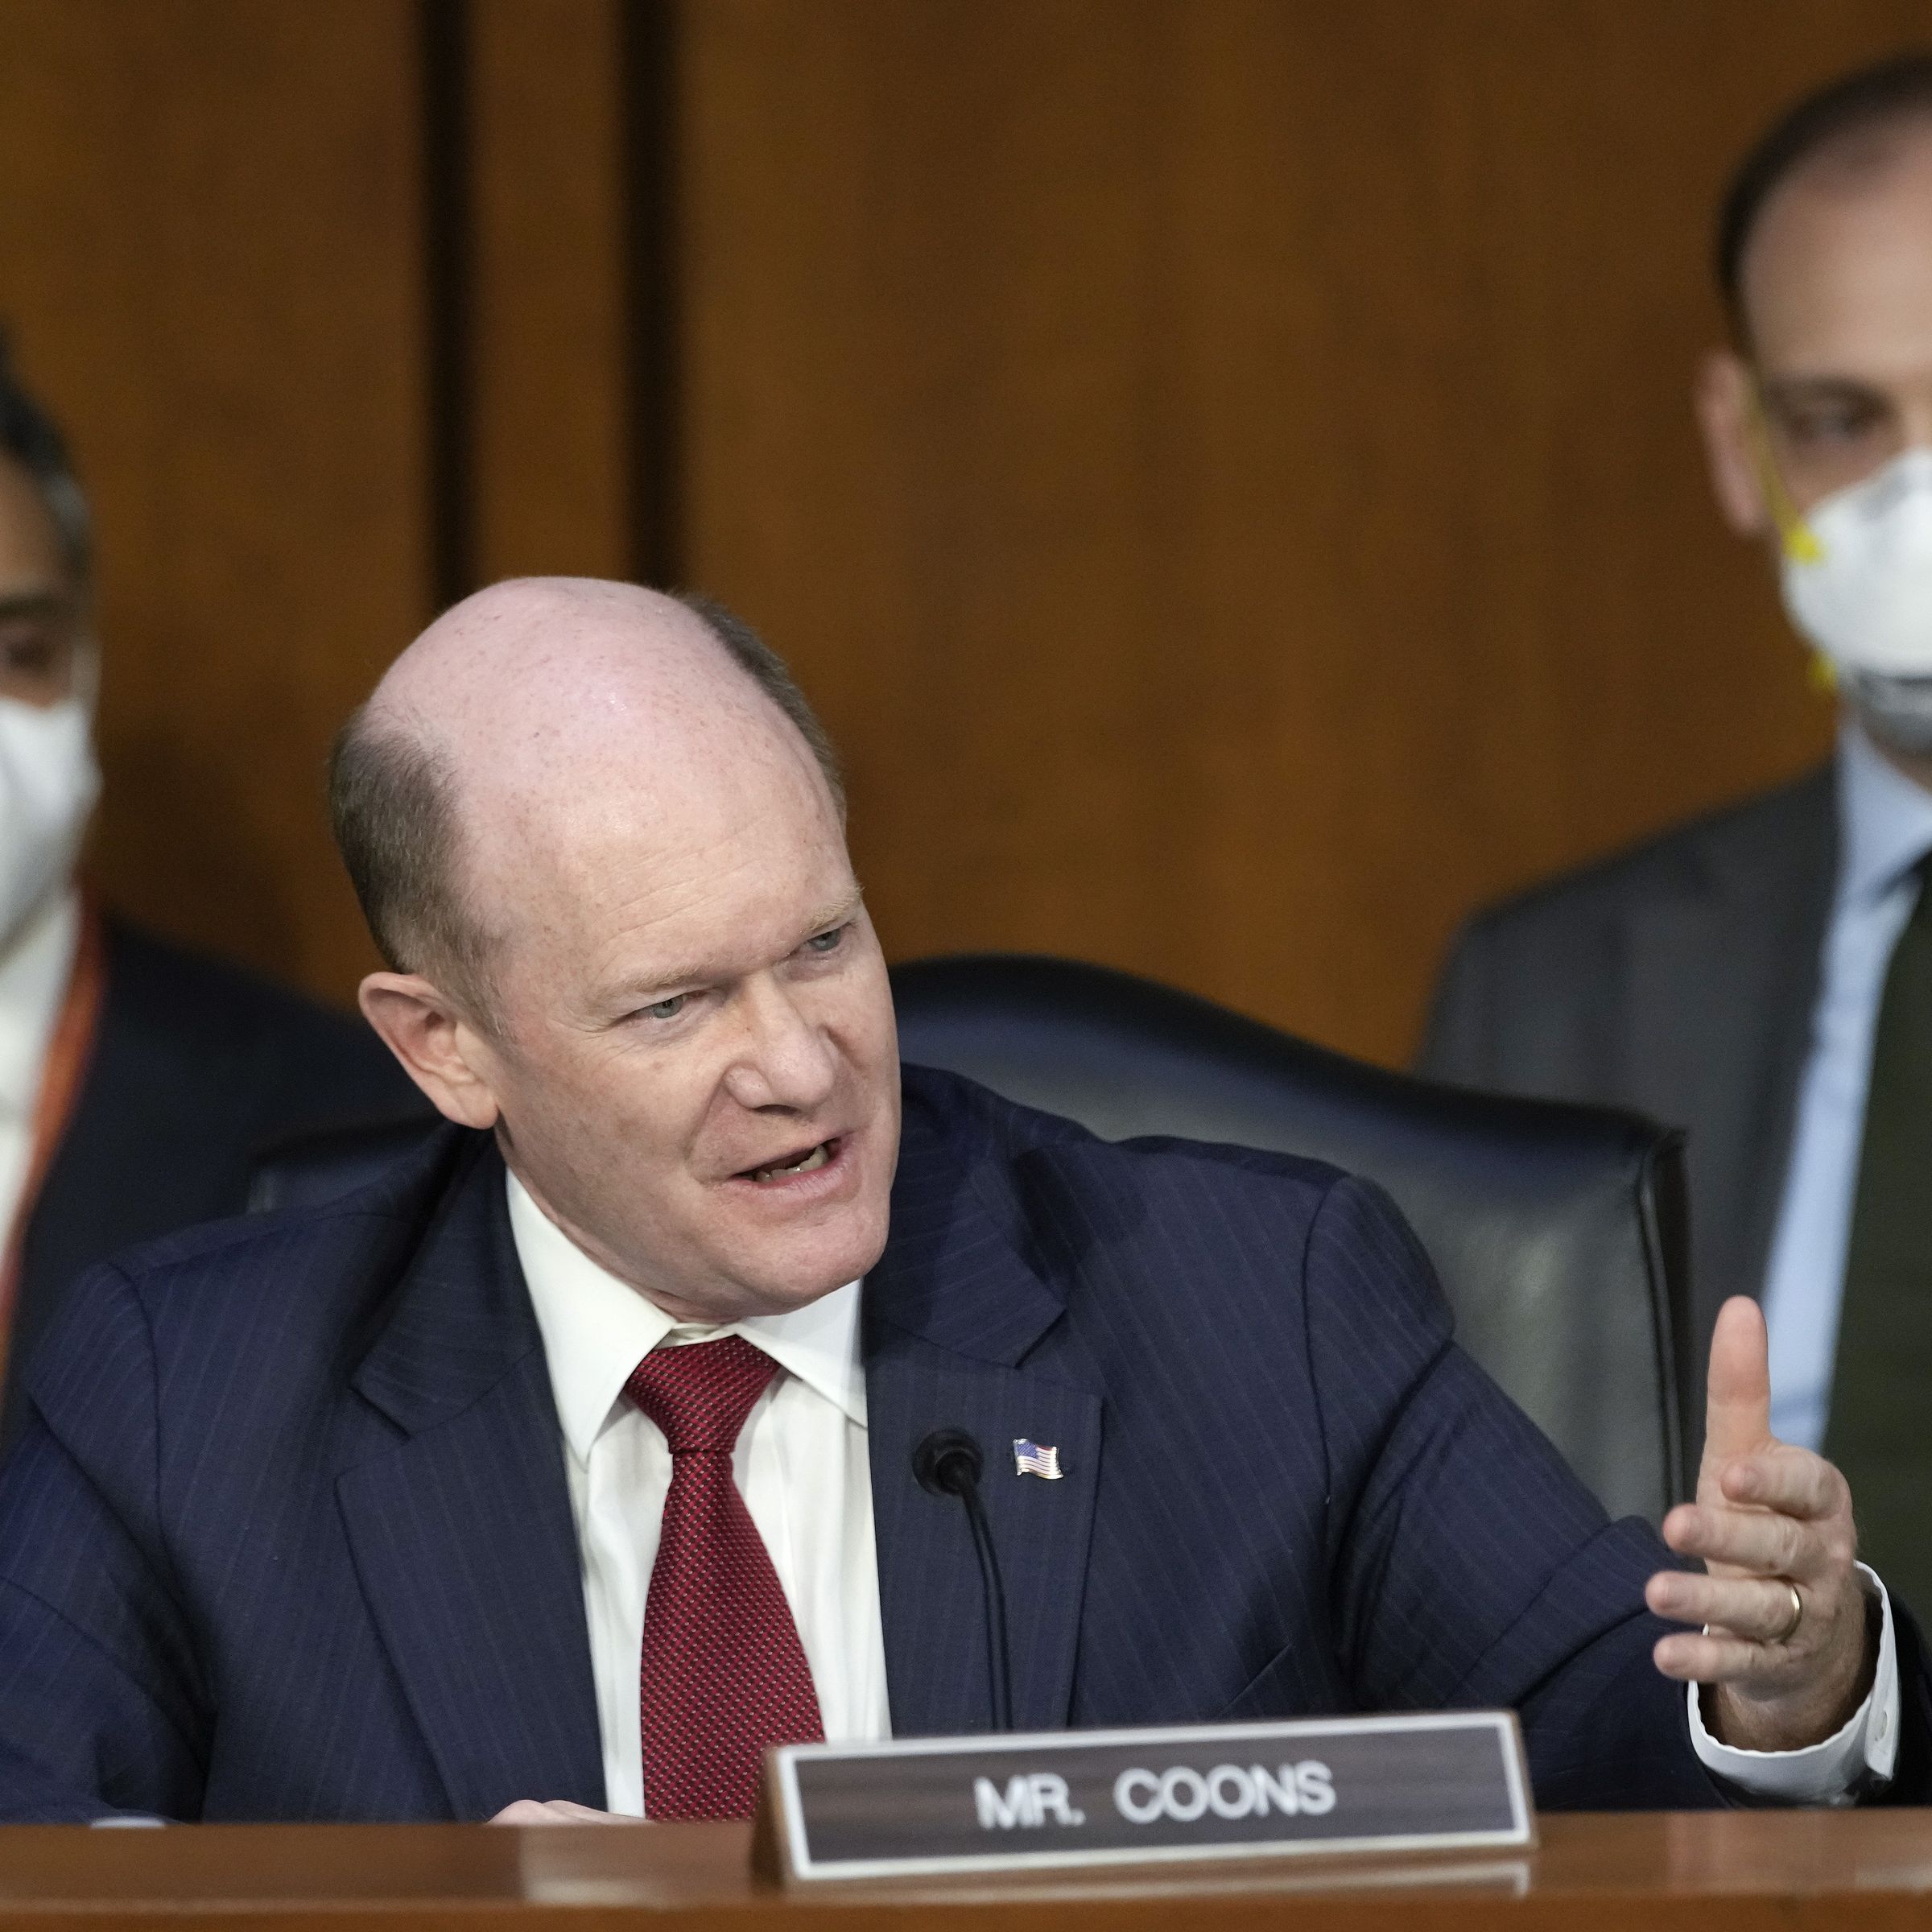 Sen. Chris Coons, who led Wednesday’s hearing on tech transparency, during a previous hearing in March